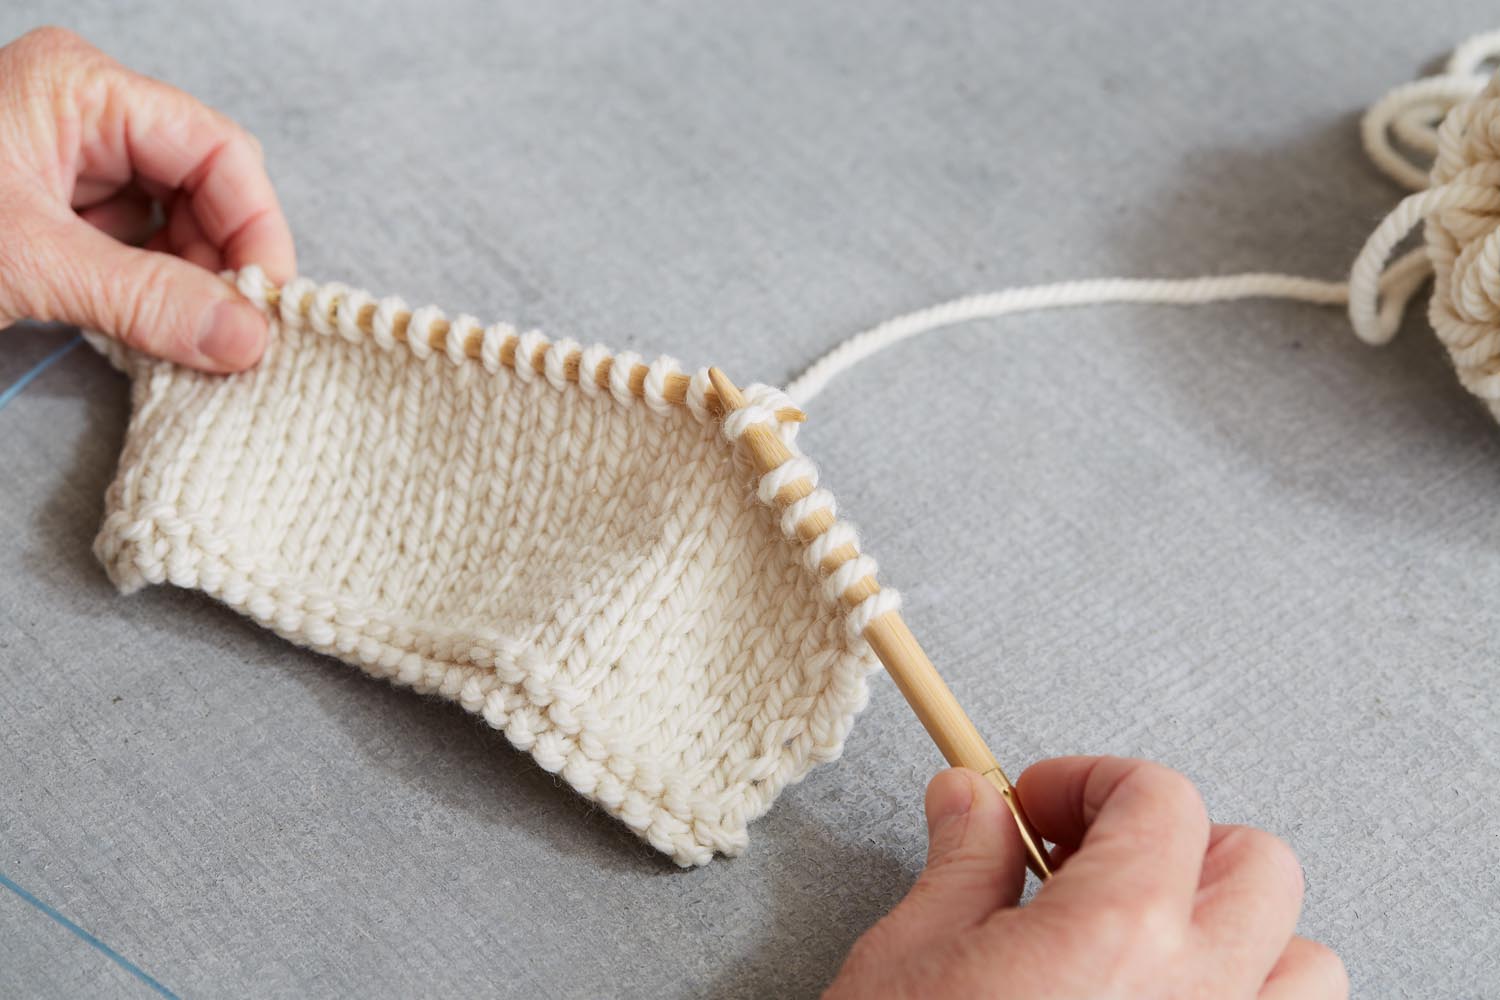 How to Slip Slip Knit (SSK) More Neatly – Cocoknits